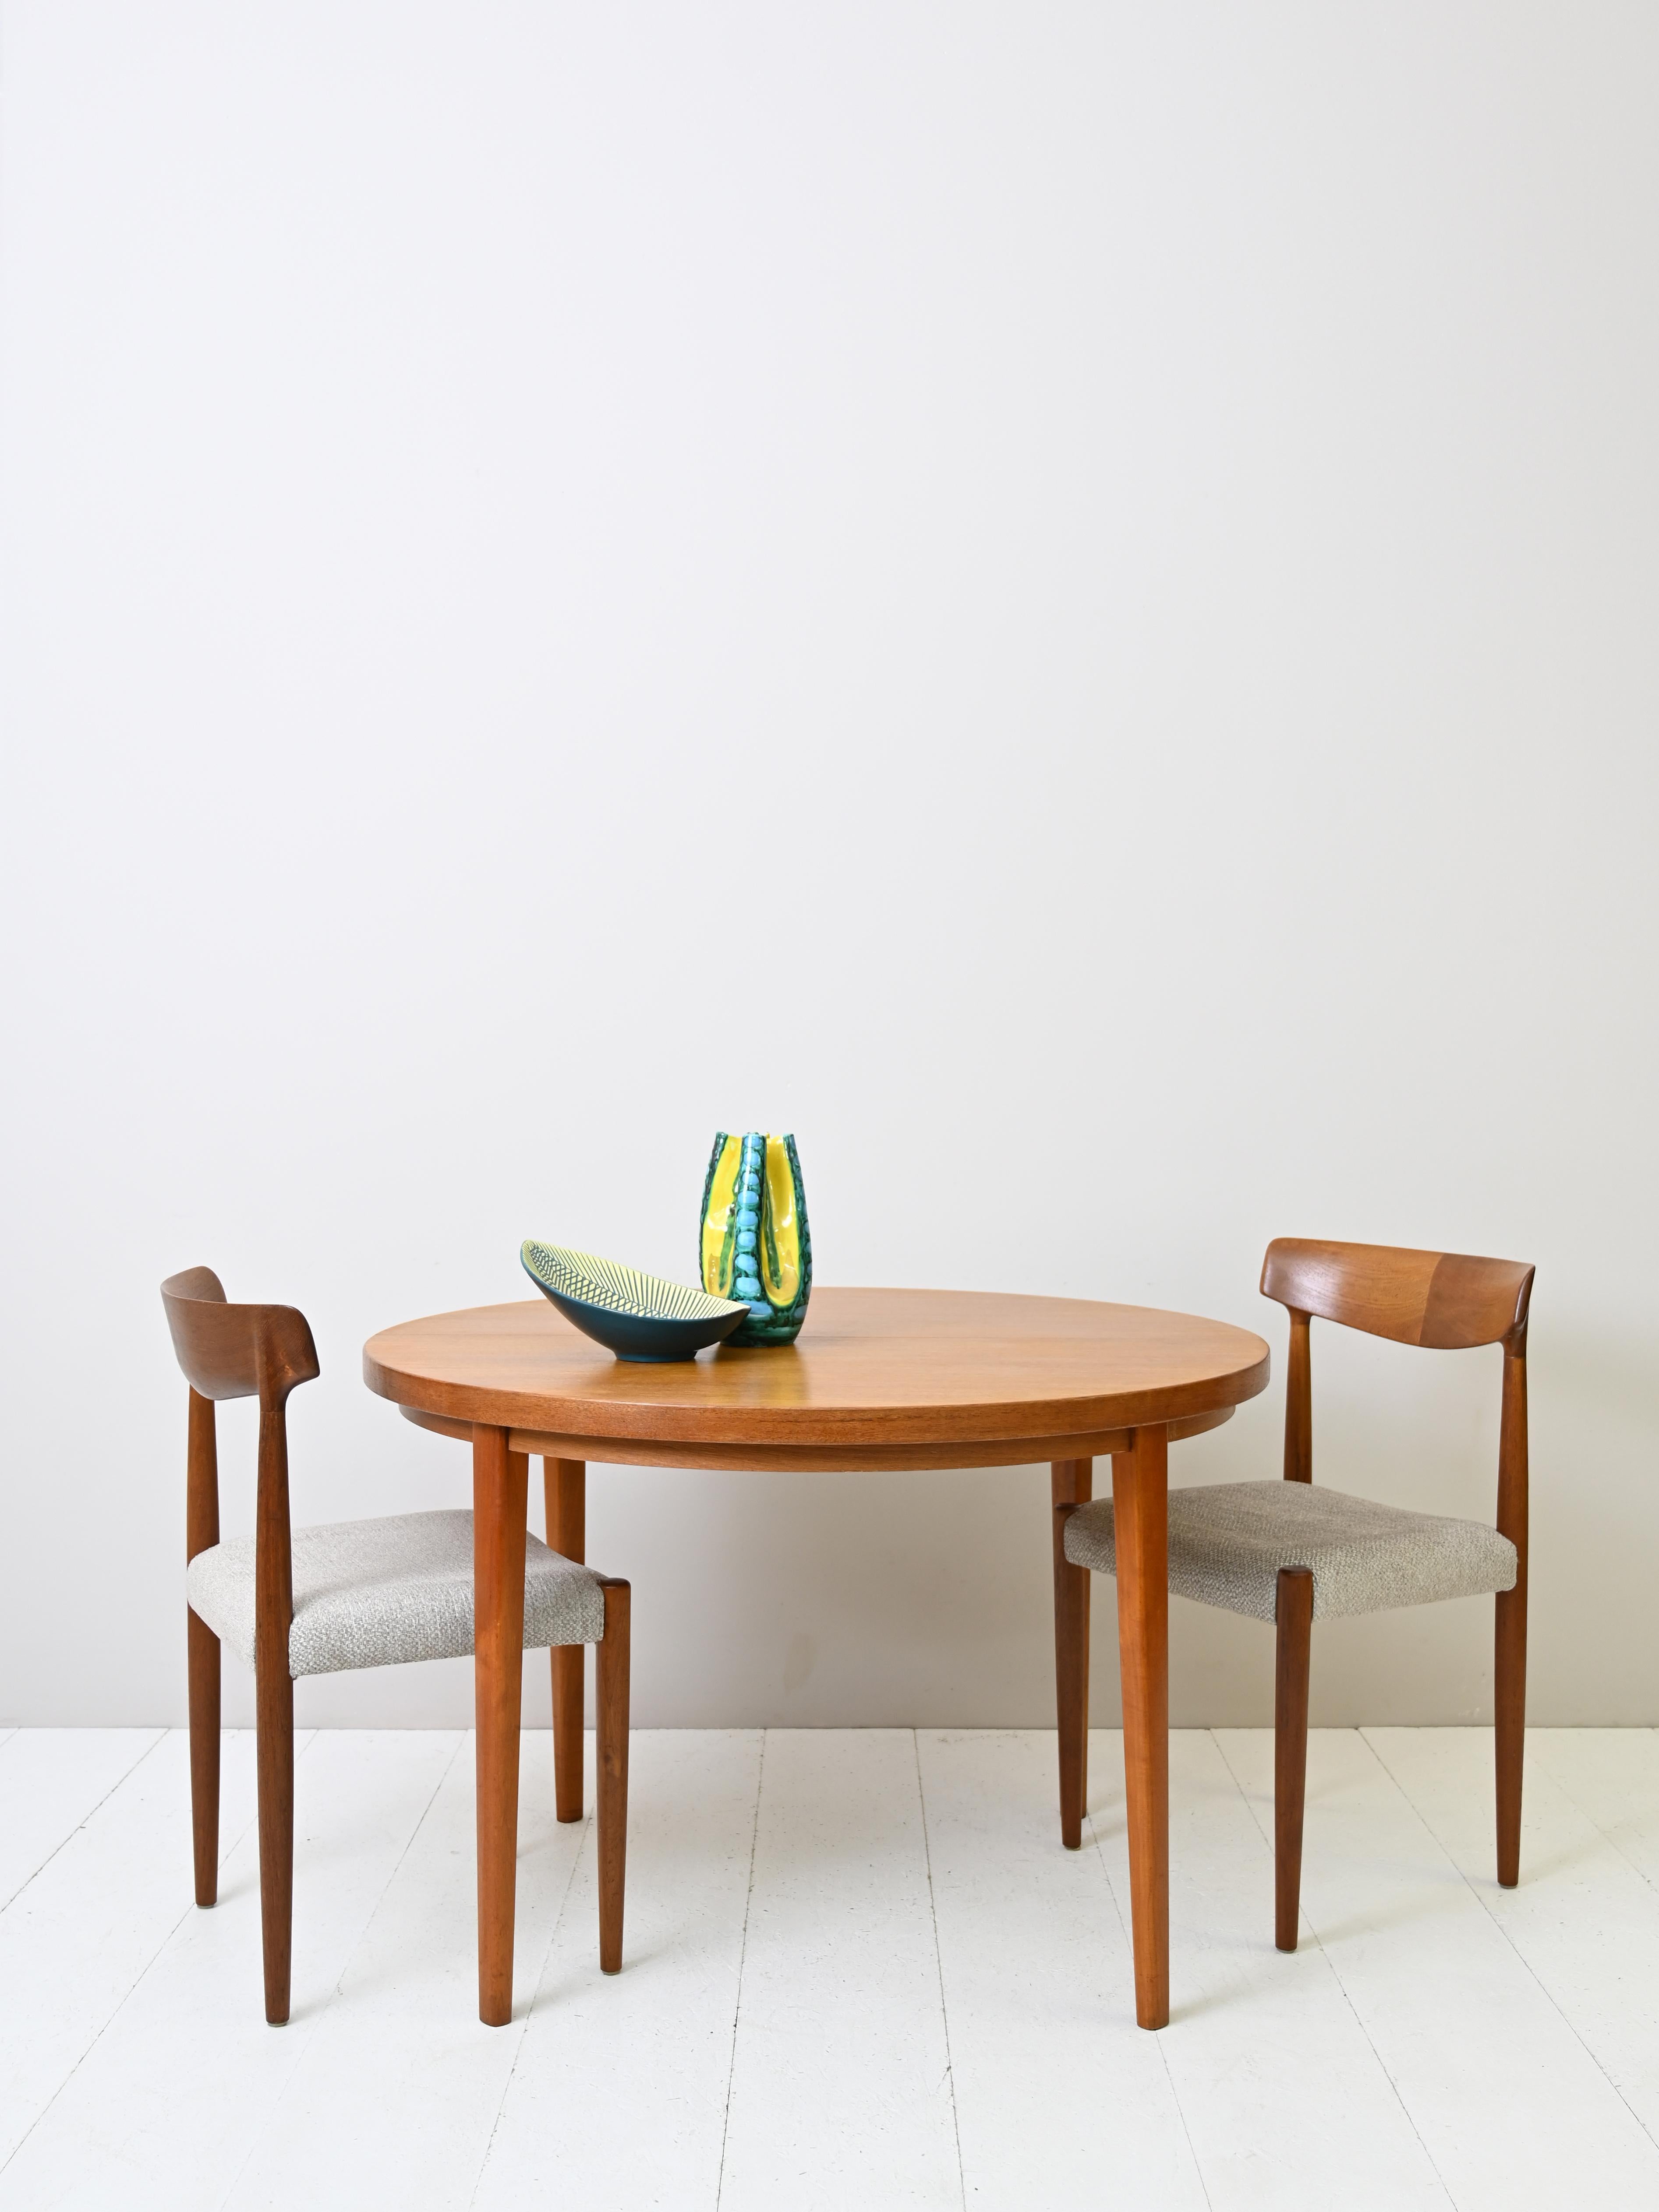 Scandinavian teak table from the 1960s.
Characterized by simple and elegant forms, it allows it to be extended thanks to an axle
additional teak wood board.

AXLE DIMENSIONS 33 CM, TOTAL LENGTH 143 CM

The legs result in perfect harmony with